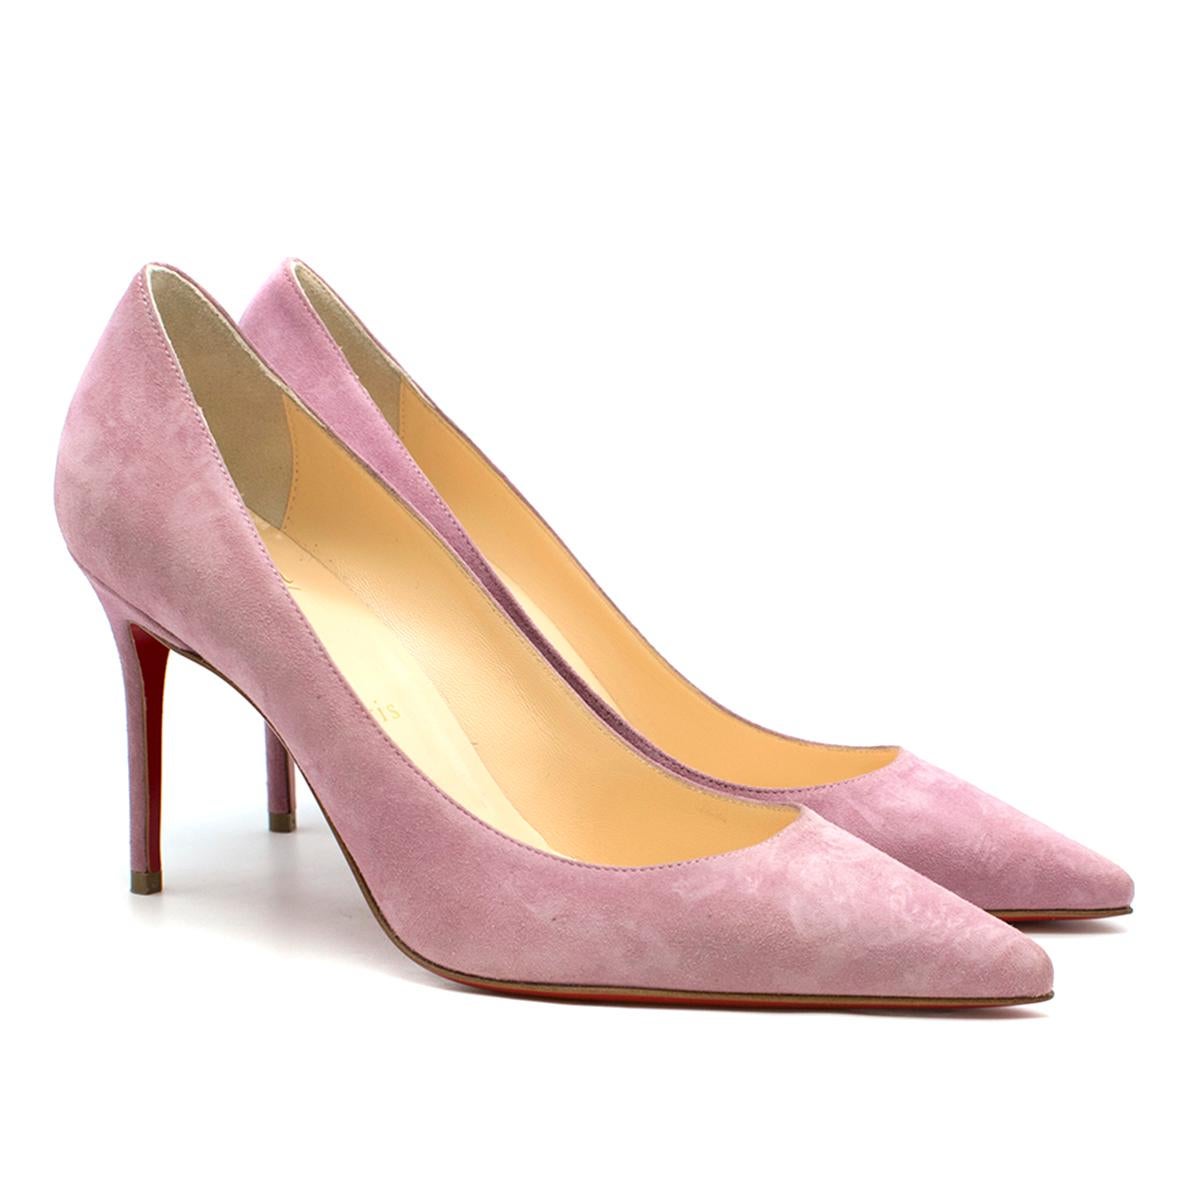 Christian Louboutin Mauve Suede Decoullete 85mm Pumps

- Mauve suede Pumps
- Pointy toe
- Stiletto heel 
- Nude leather insole
- Signature red leather sole

This item comes with the original box and dust bag. 

Please note, these items are pre-owned